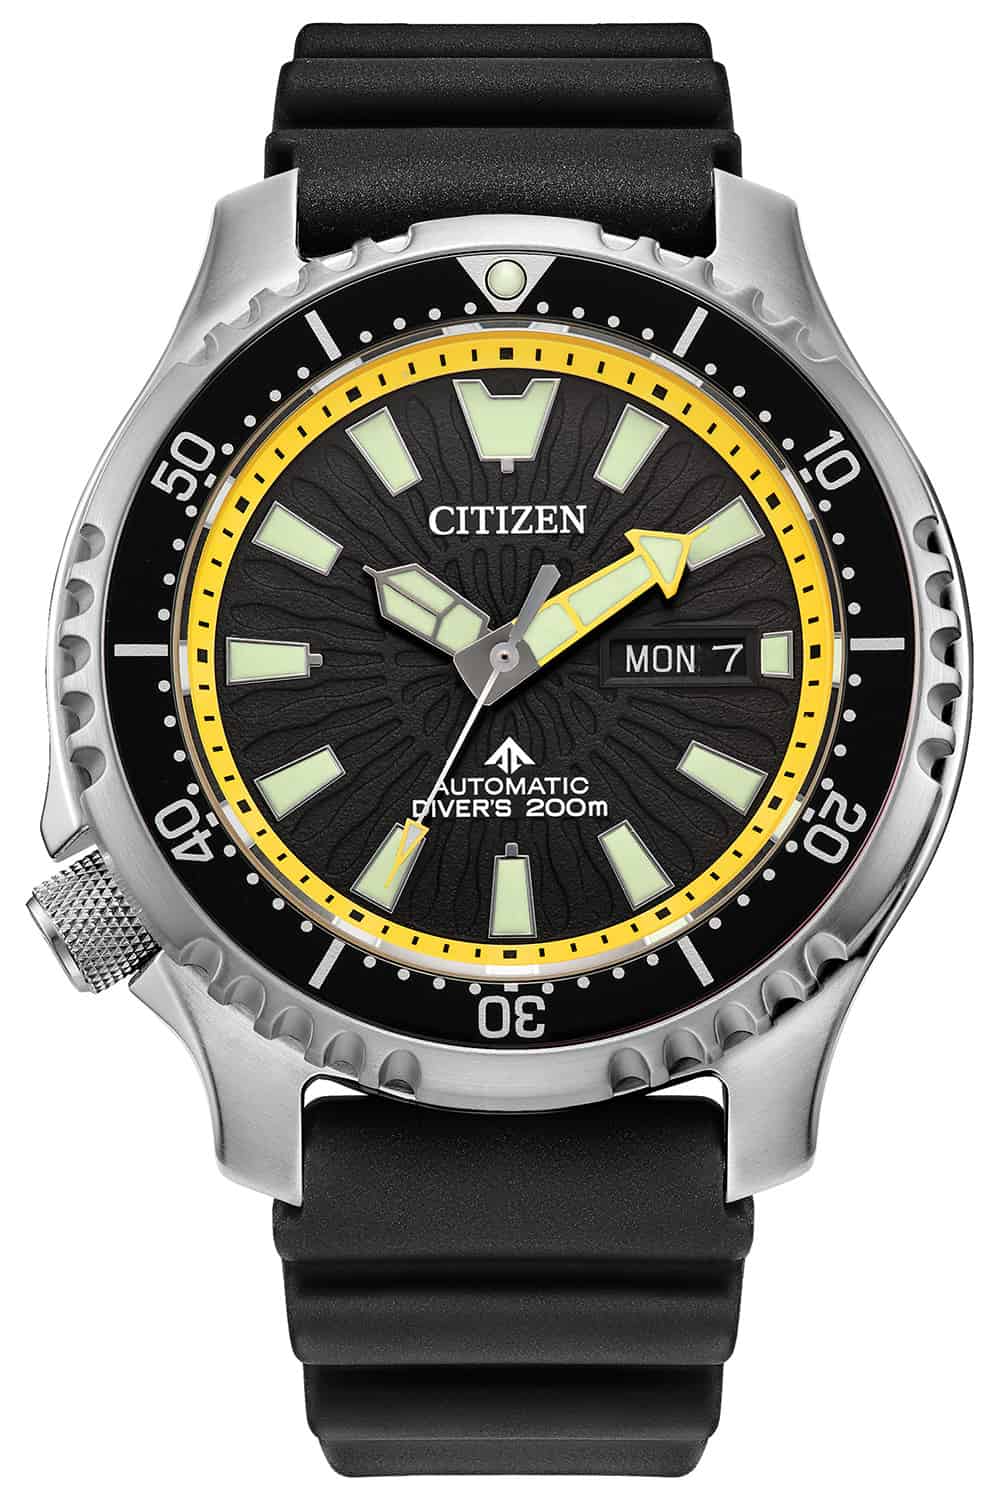 The Citizen Promaster Dive Automatic Gets a “Fugu” Makeover